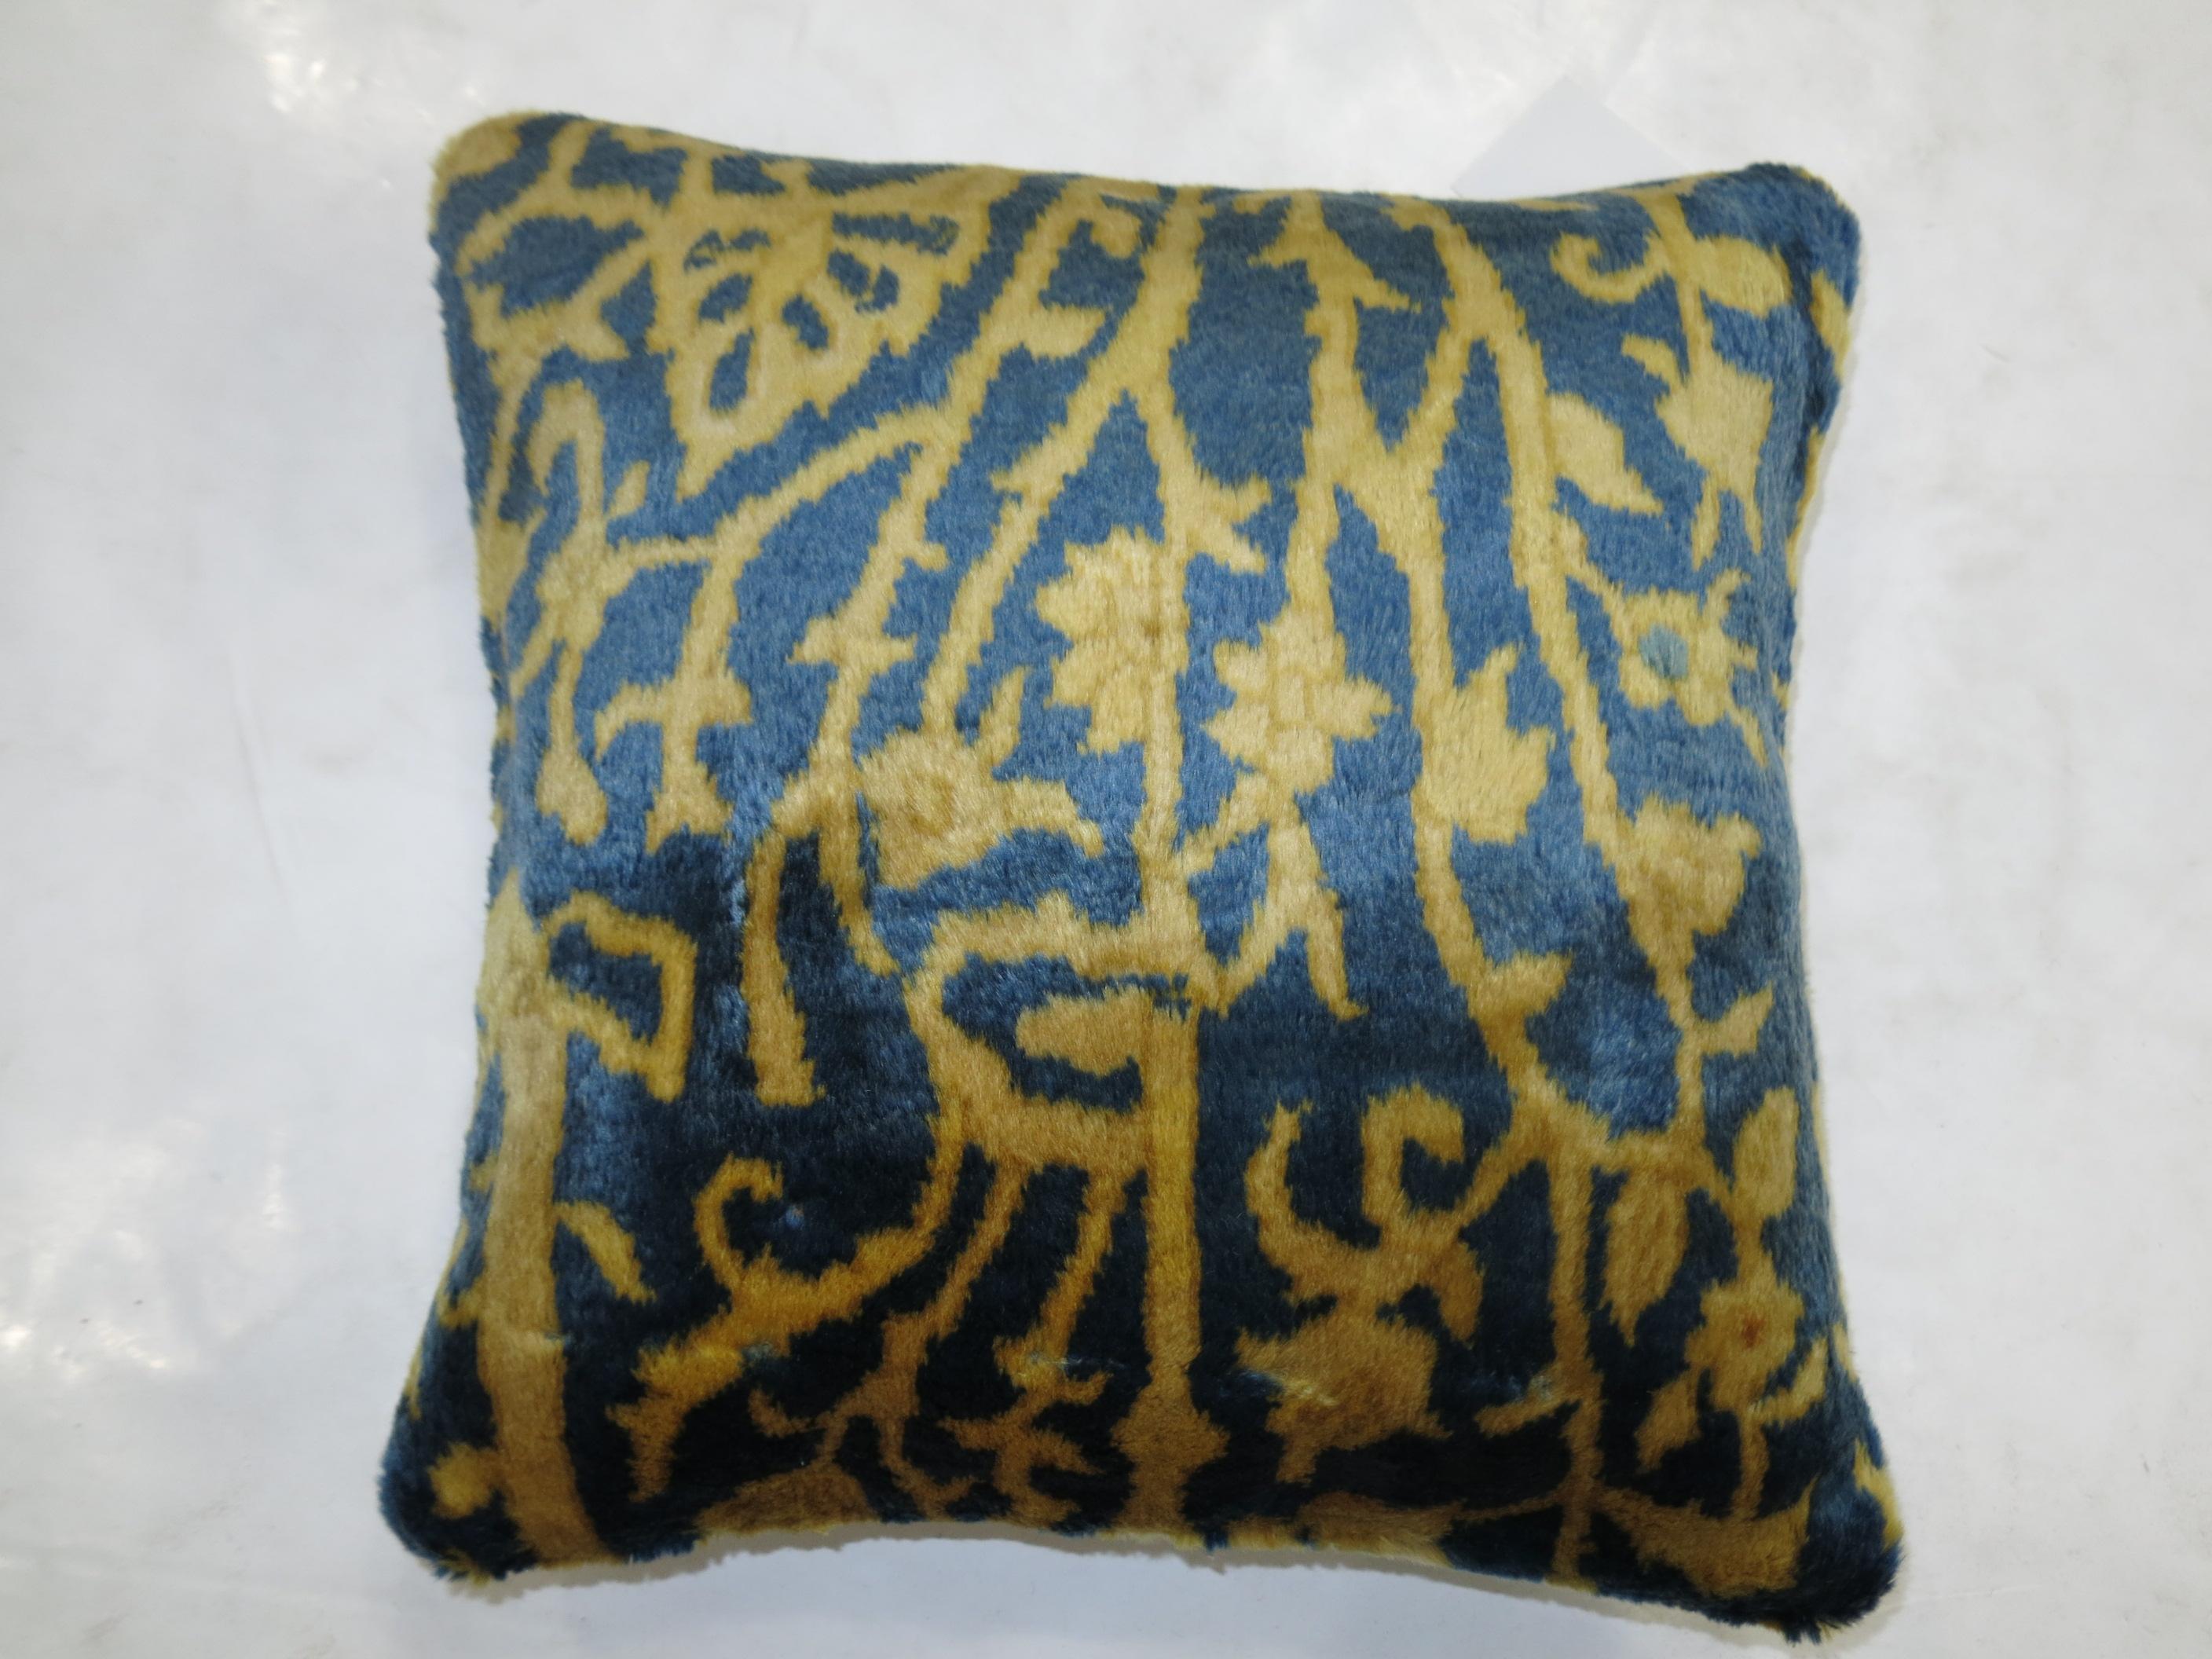 Pillow made from a vintage Indian Agra rug featuring fluffy wool in blue and gold. zipper closure and poly fill insert provided

Measures 16'' x 16'' square.